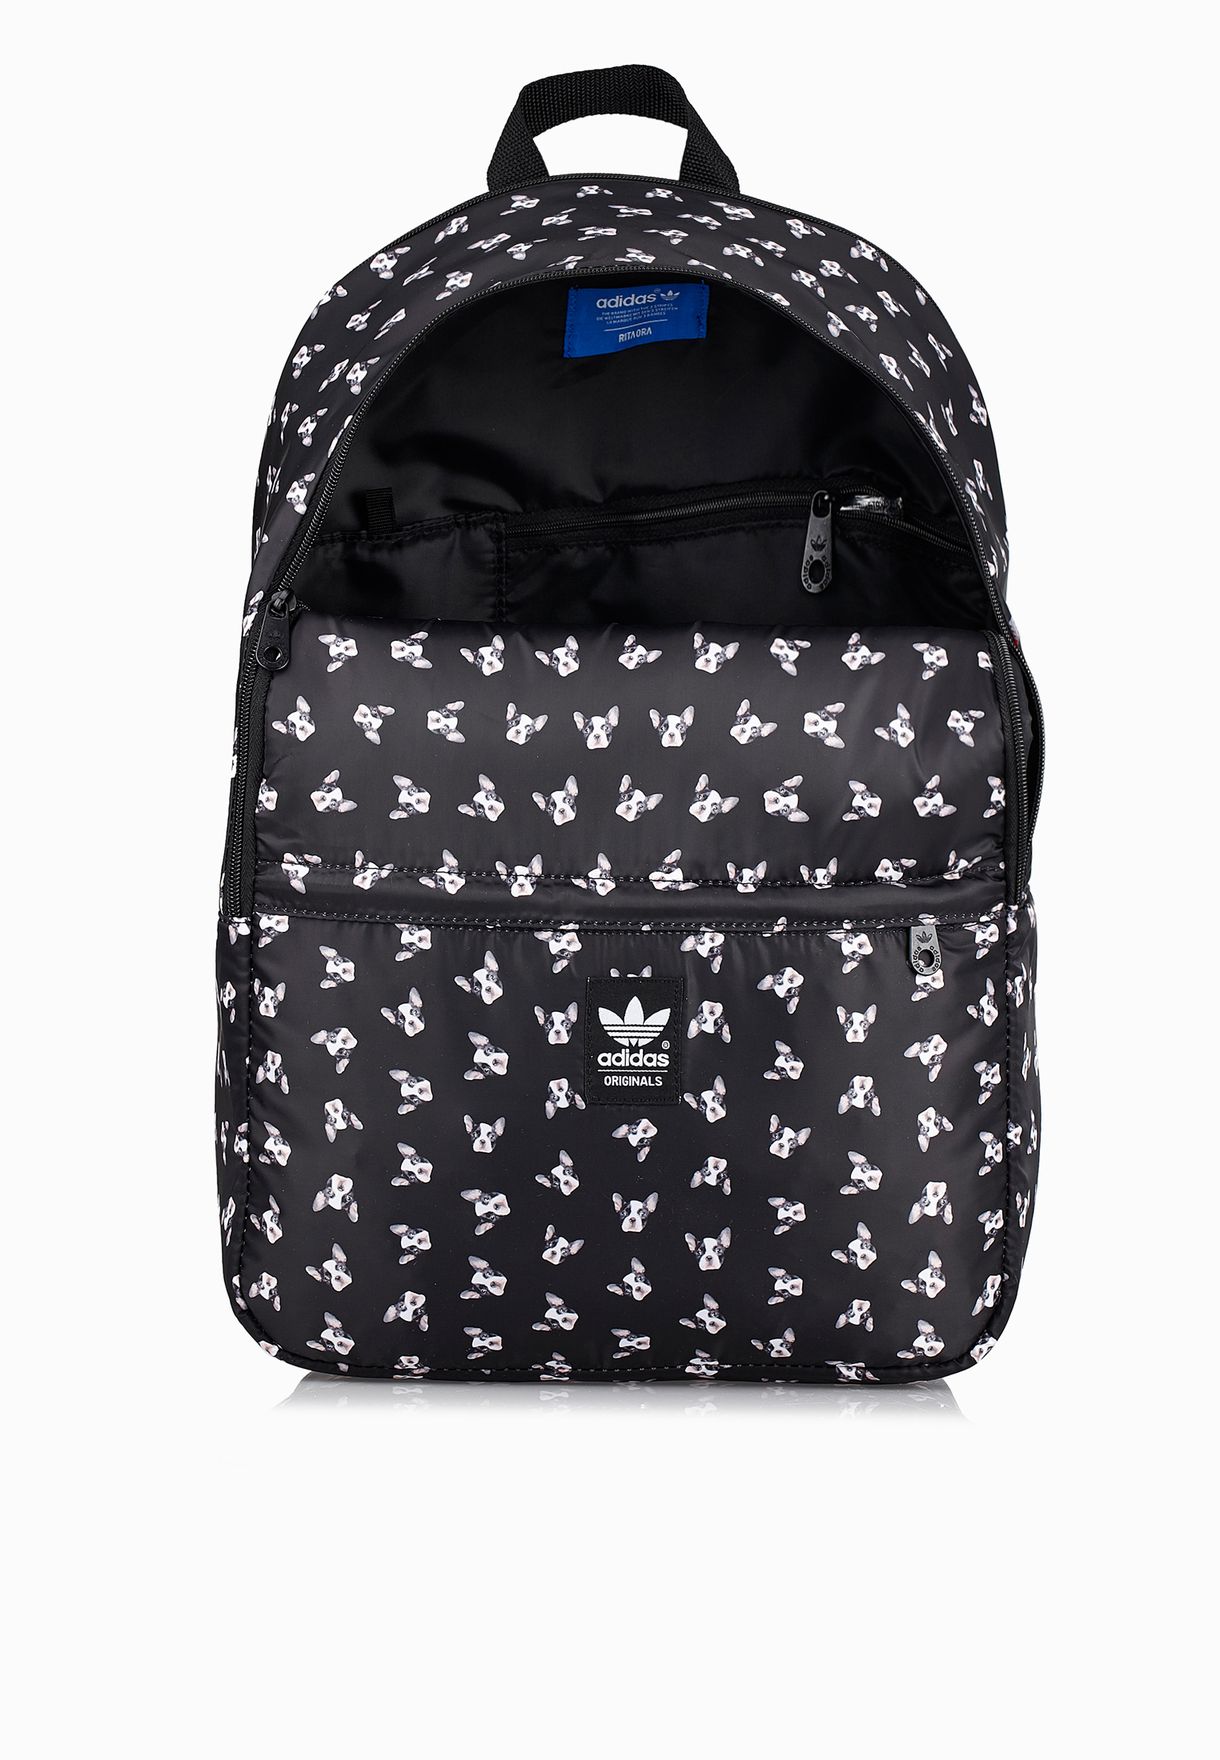 adidas puppy backpack